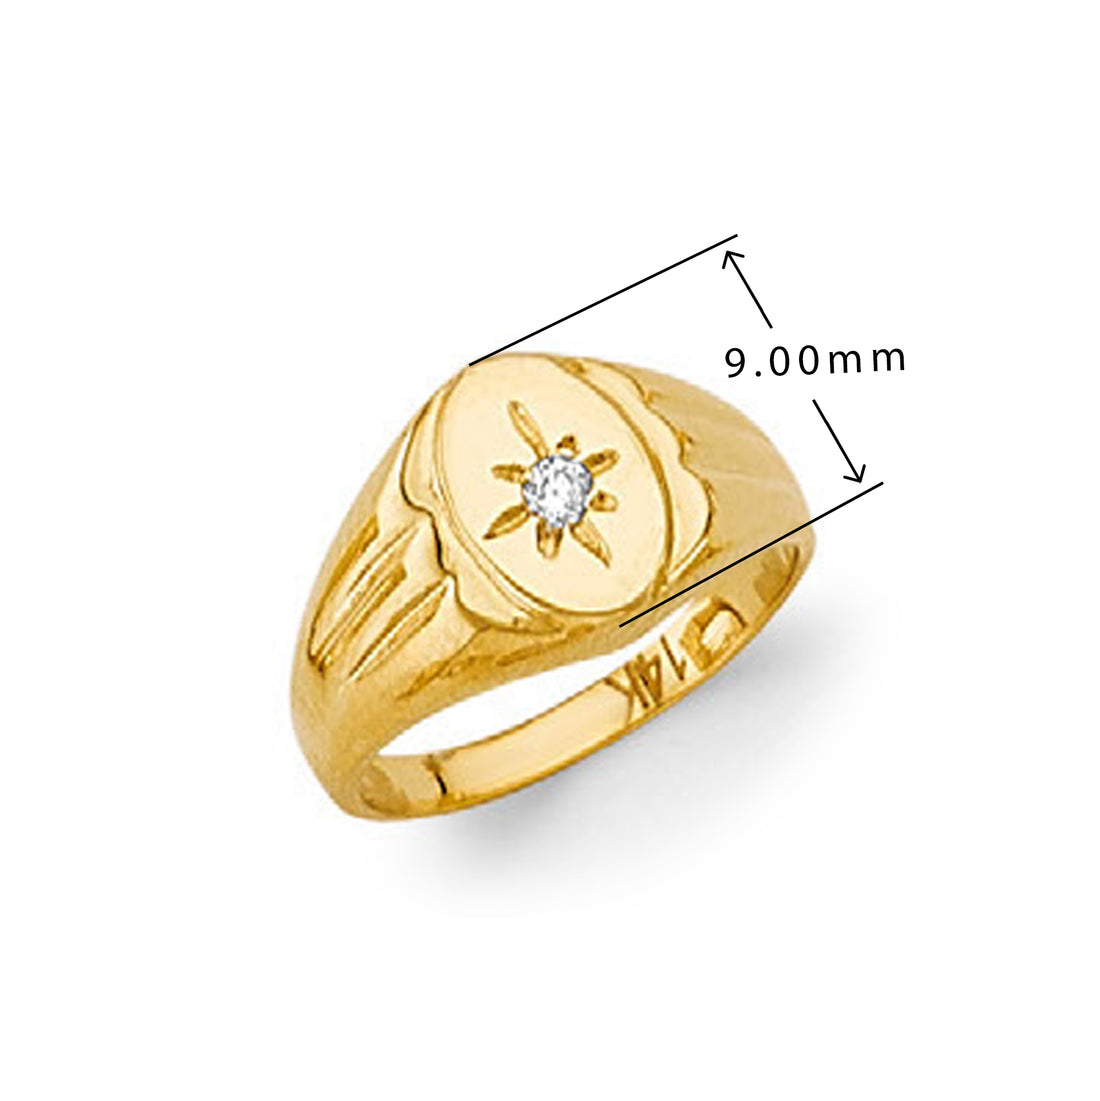 CZ Hollywood Striped Signet Ring in Solid Gold with Measurement